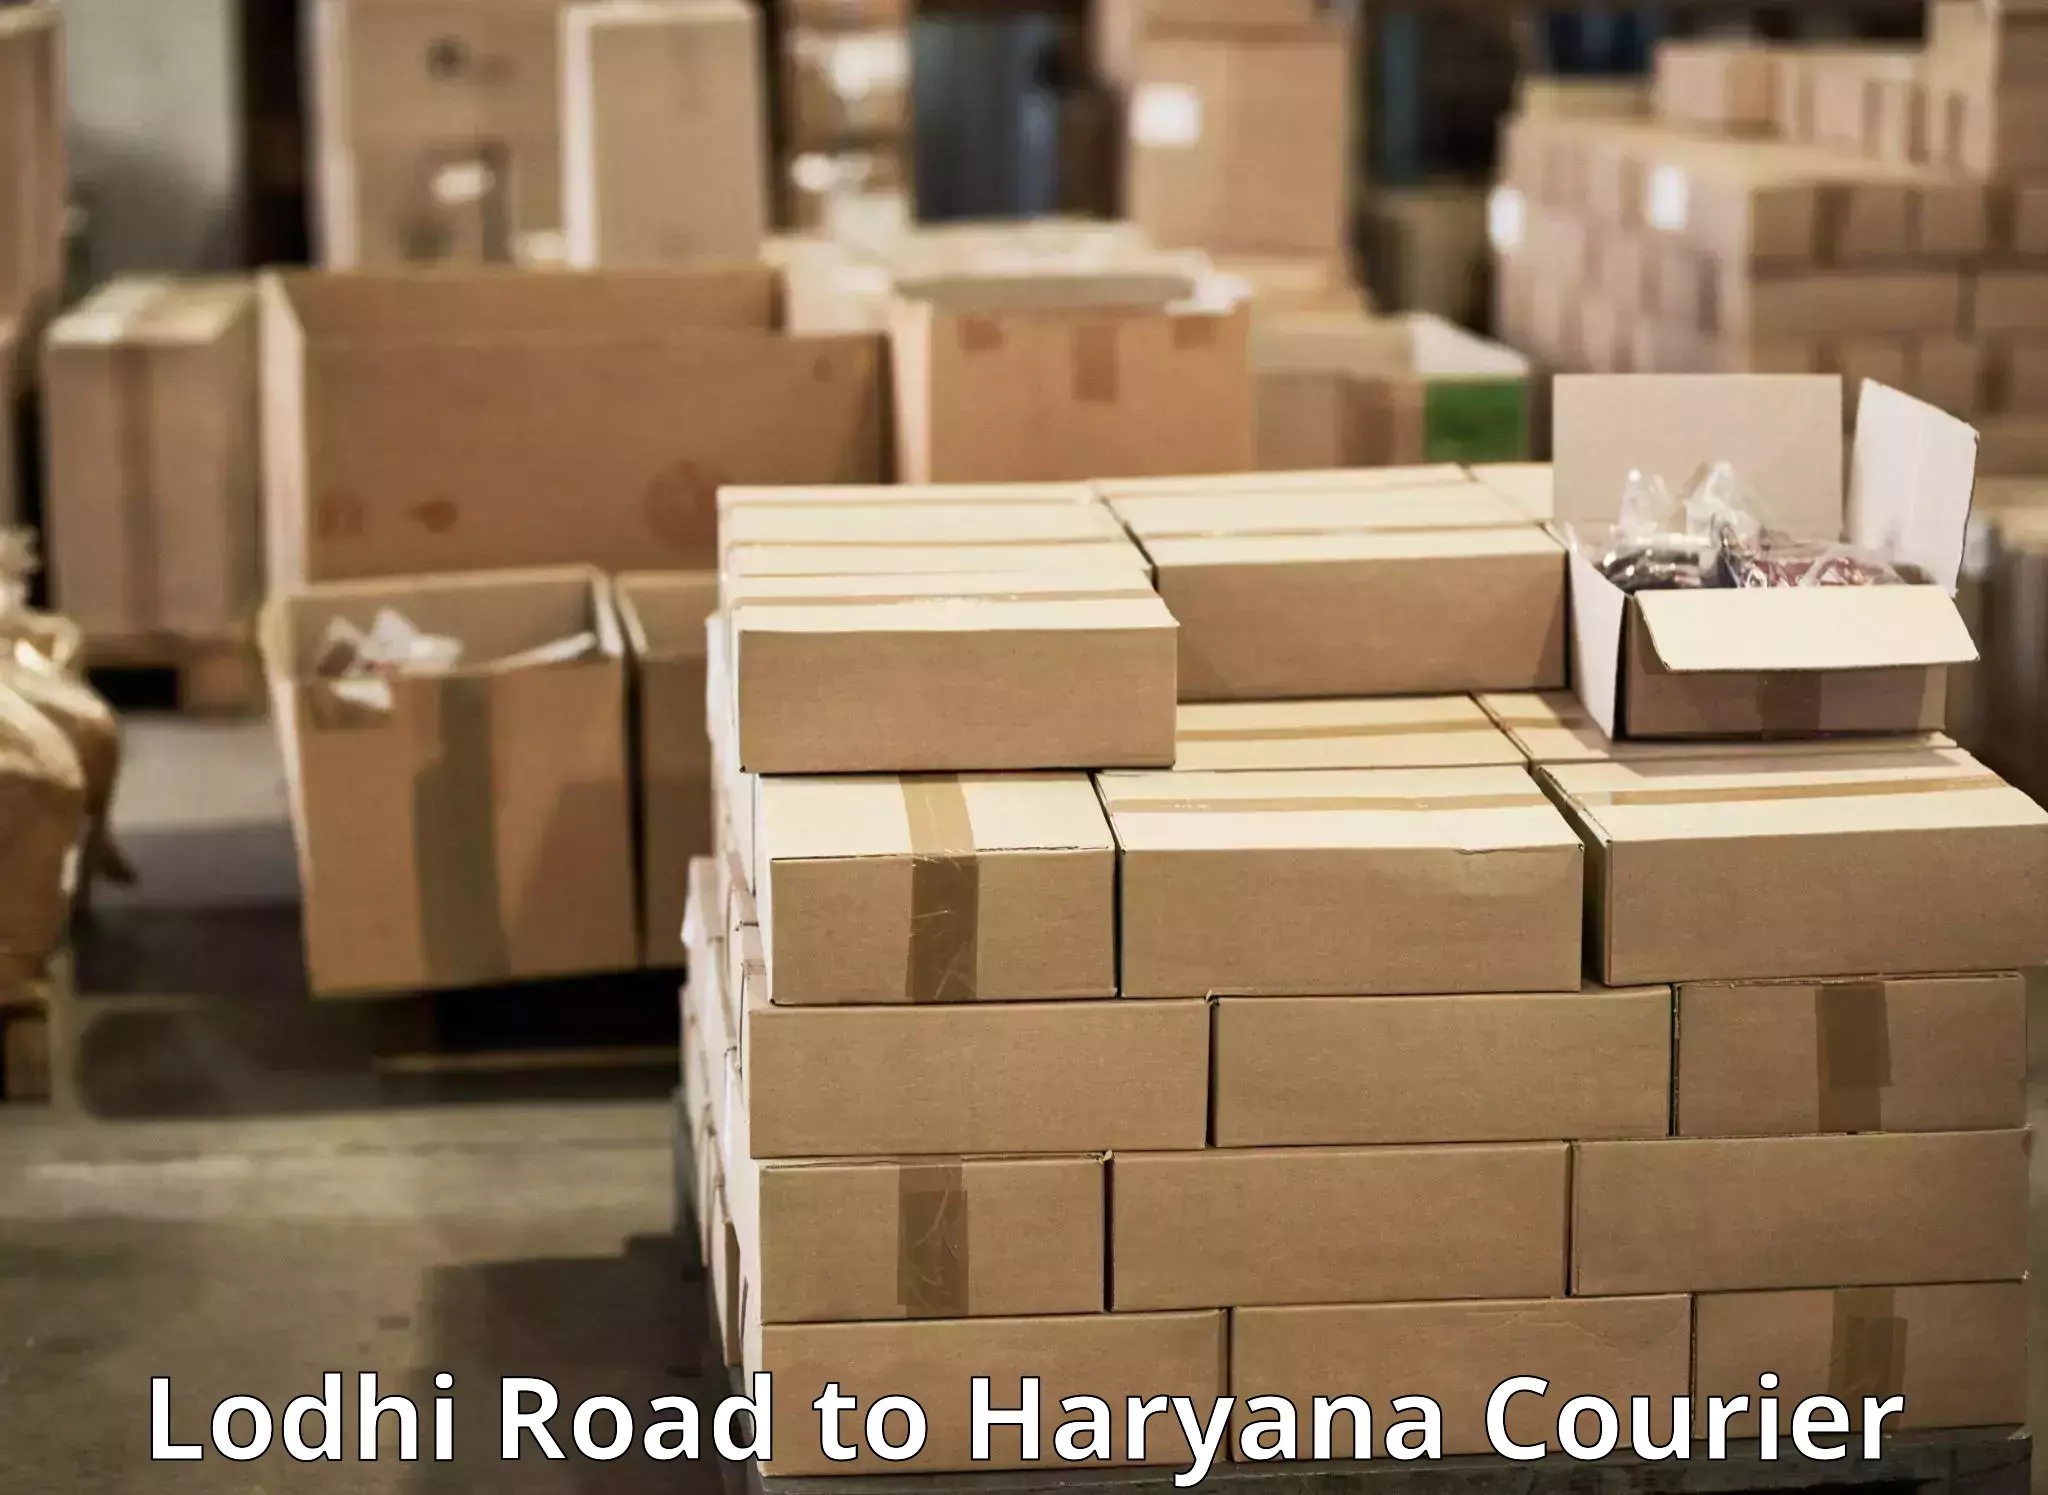 Parcel handling and care Lodhi Road to Gurgaon